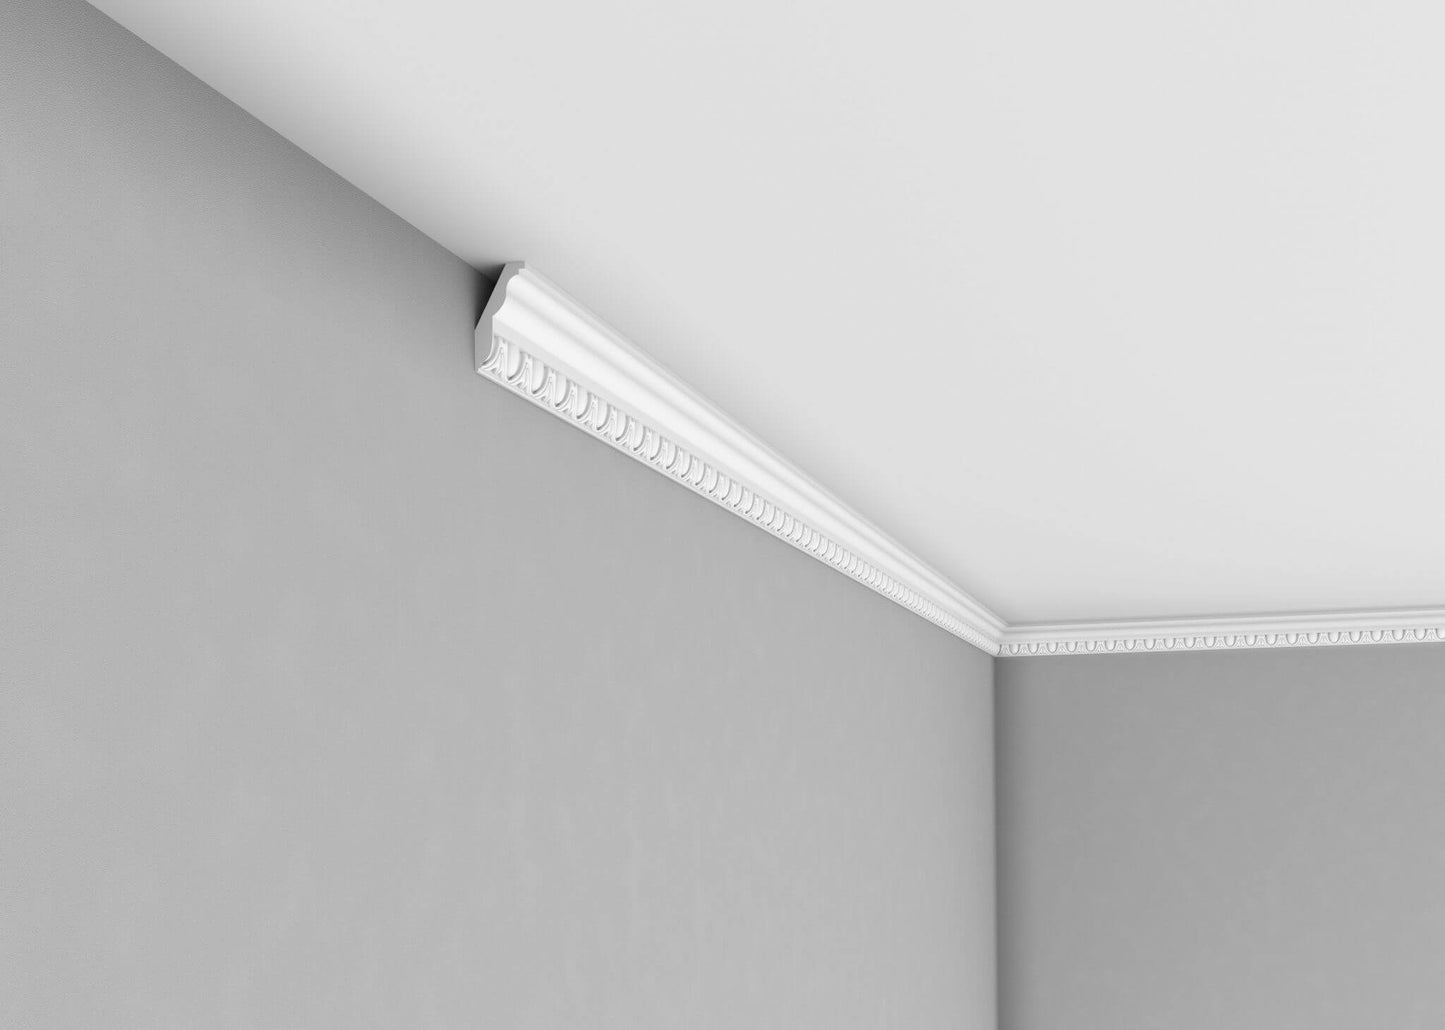 C3203 - Classic Coving installed